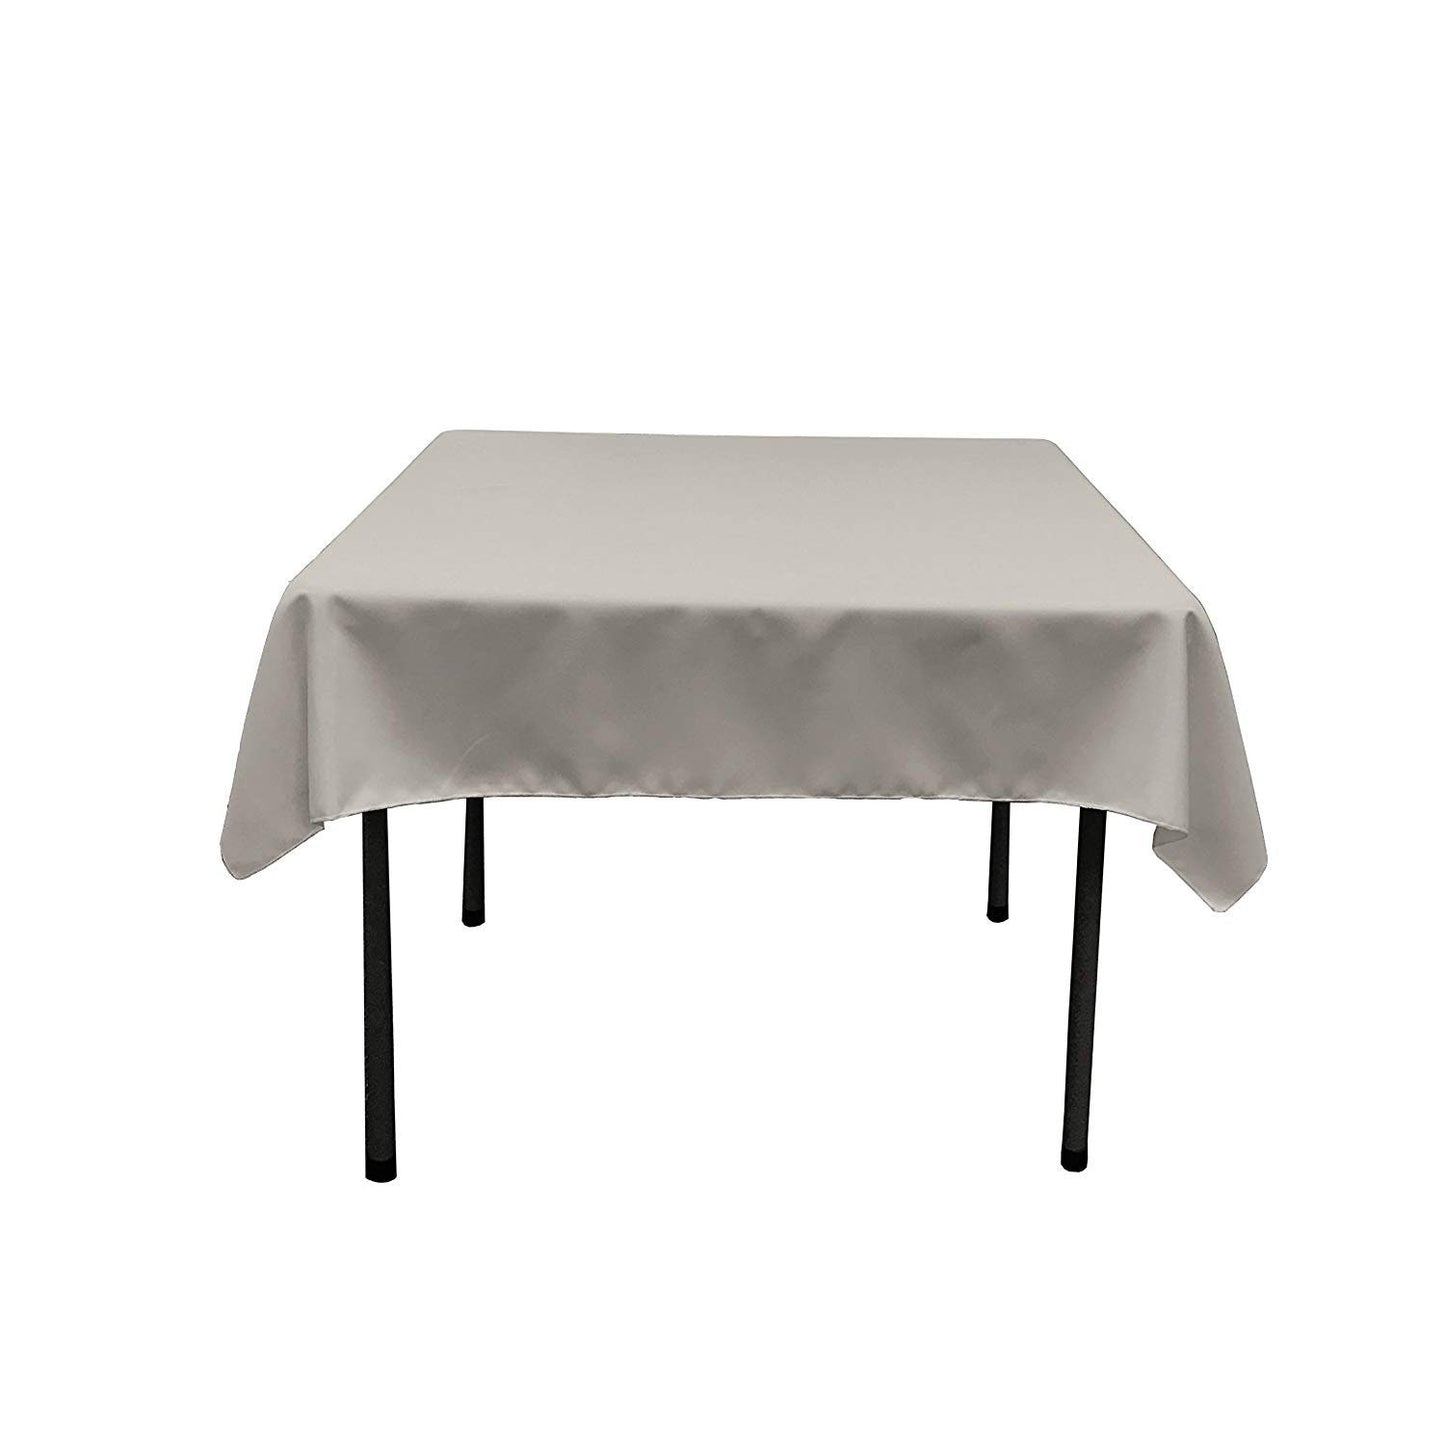 54 x 54-Inch Seamless Silver Rectangular Polyester Tablecloth for Wedding Party Decorations Square Table Cloth Cover